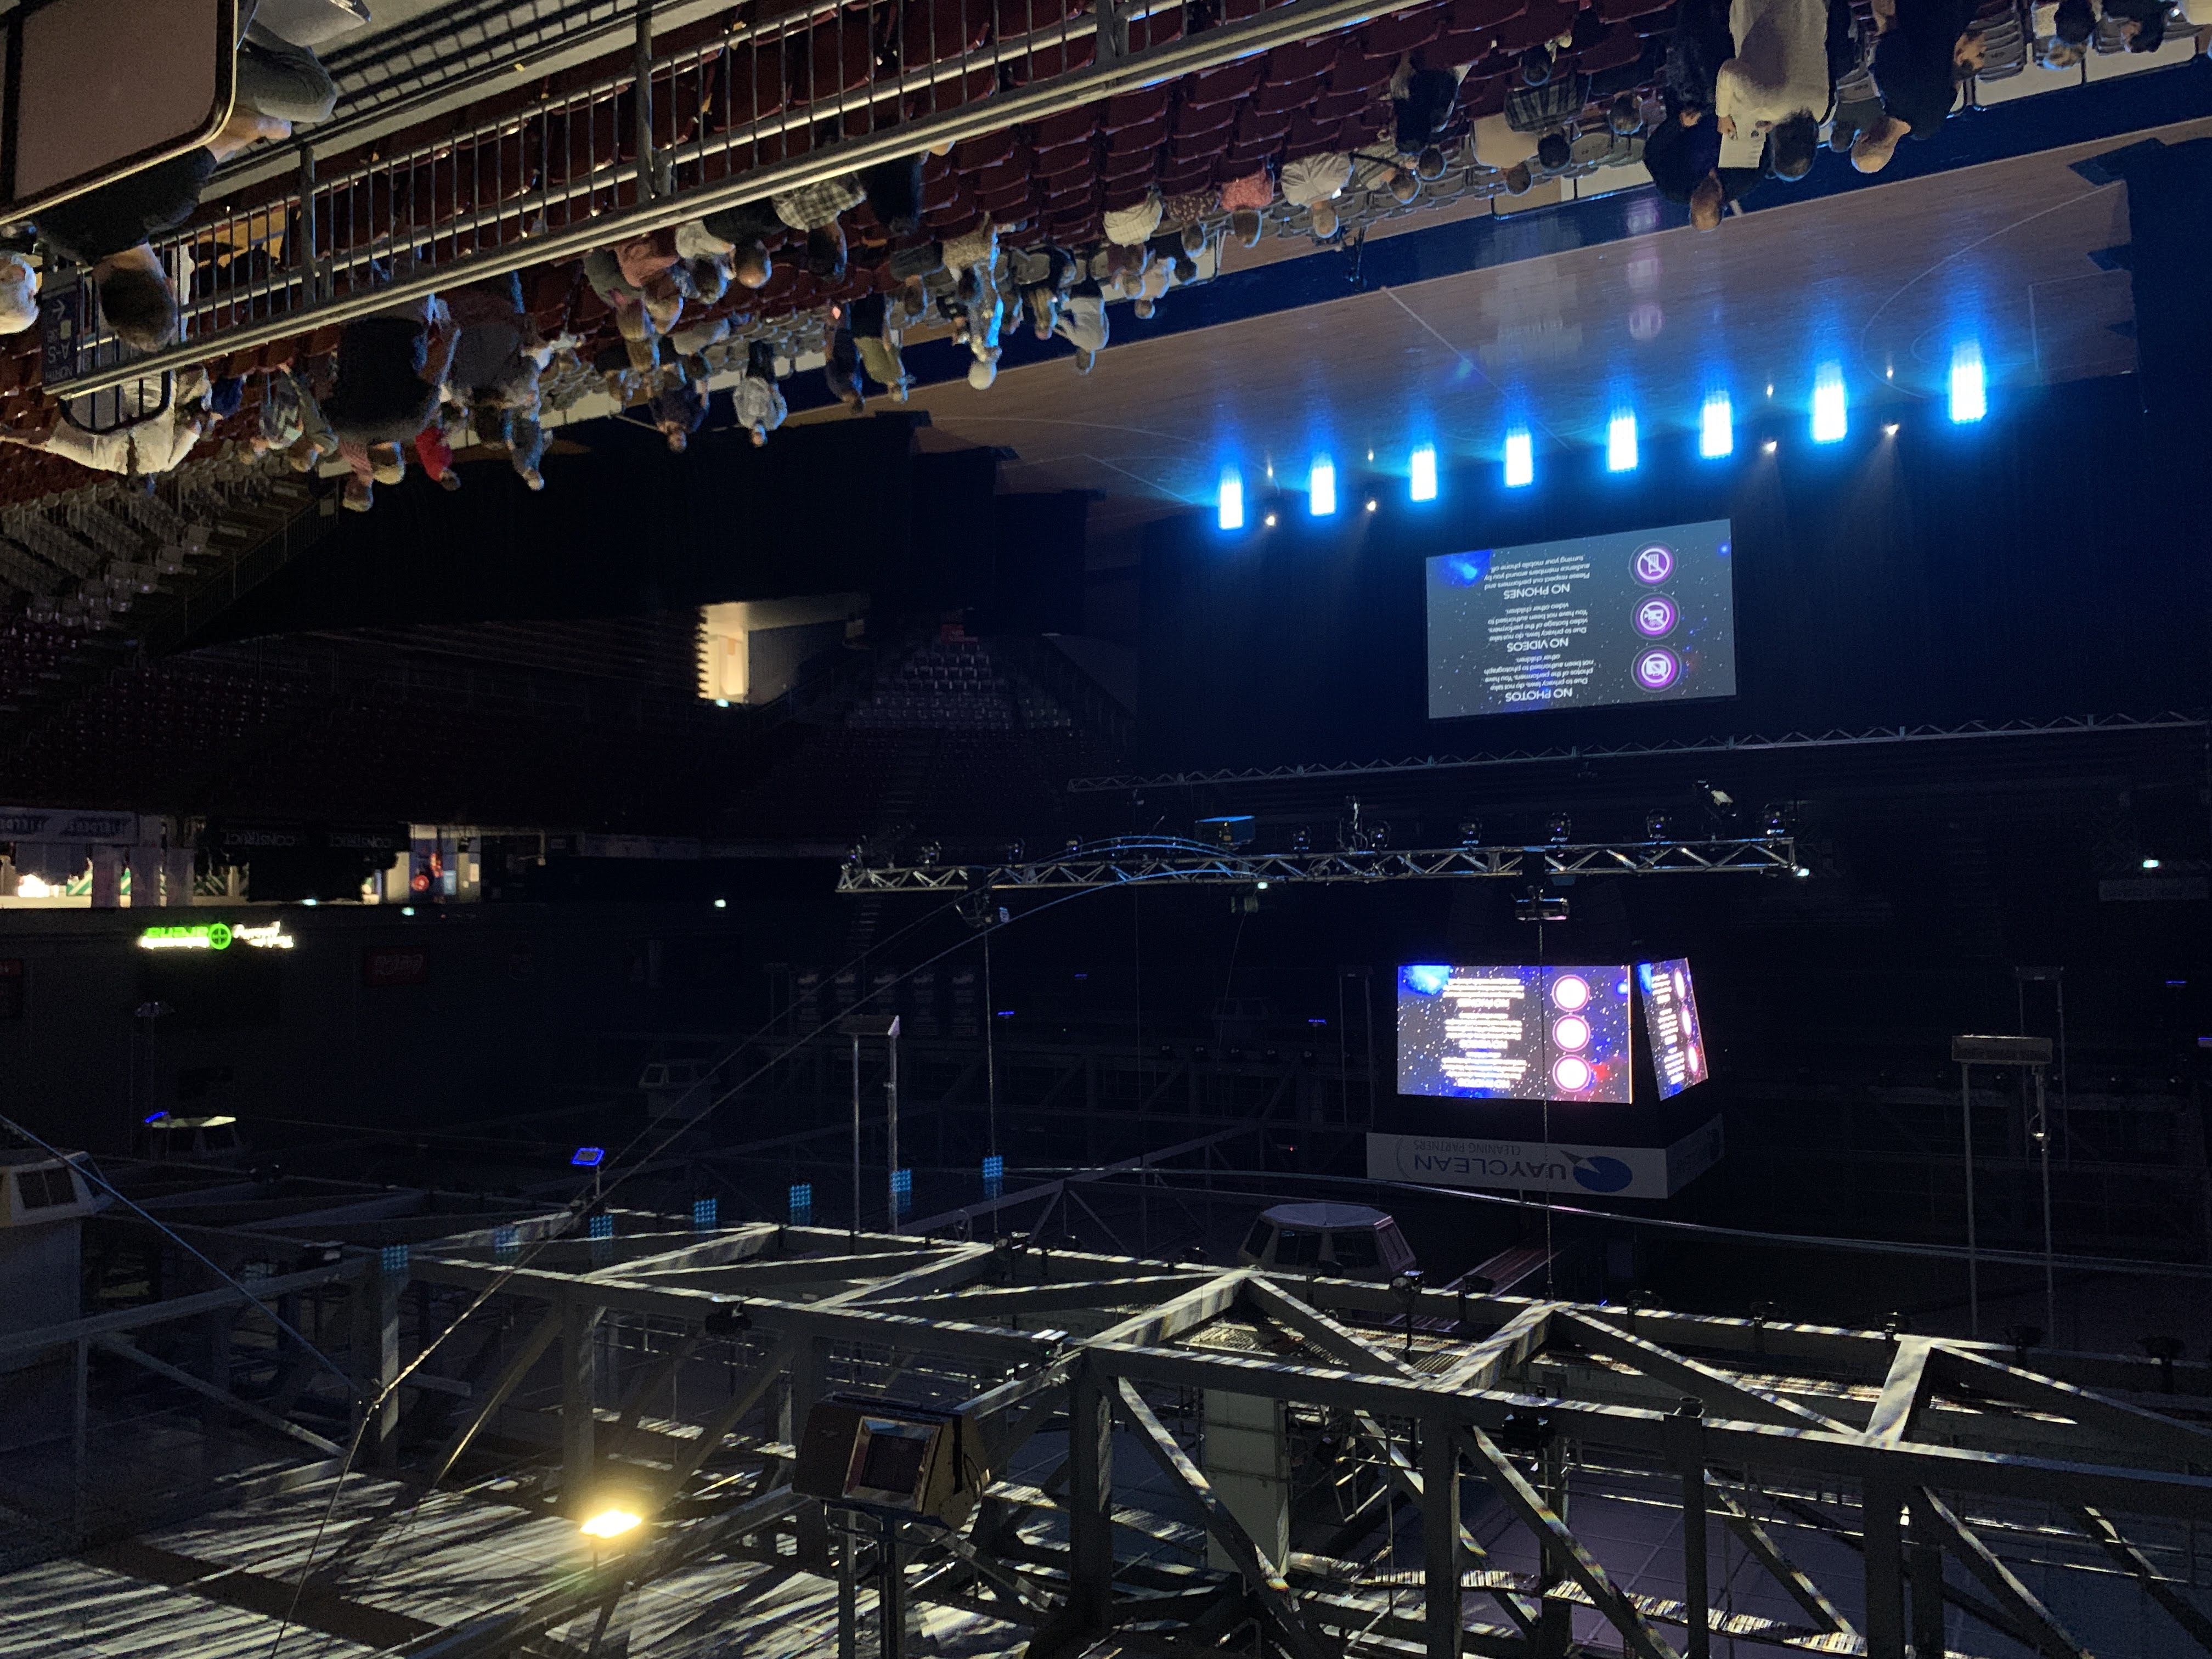 This image depicts an indoor arena setting during what appears to be the preparation for an event. The venue is semi-lit with a combination of natural and artificial lighting. In the upper part of the image, we can see a complex network of metal trusses, some with attached stage lights, that form part of the ceiling structure. There is a central, cubic scoreboard displaying information, which indicates that the venue can be used for sports events as well.

Below, a large stage is visible with a screen that reads "NO PHOTOS, NO VIDEOS, NO PHONES". This message suggests that there may be a performance or presentation planned that requires undivided attention or has restrictions on recording. The blue stage lights are on, providing an accent to the stage area and drawing focus. The seating area, which consists of rows of fixed red seats, is mostly empty, with just a few individuals gathered on the floor and around the stage, likely event staff or early attendees. The presence of people in casual attire indicates an informal gathering at this time, perhaps before the main event commences.

The layout and current activity suggest the image was taken during the preparation or soundcheck before an event. This setup would be particularly relevant for someone involved in event management or audiovisual equipment installation.